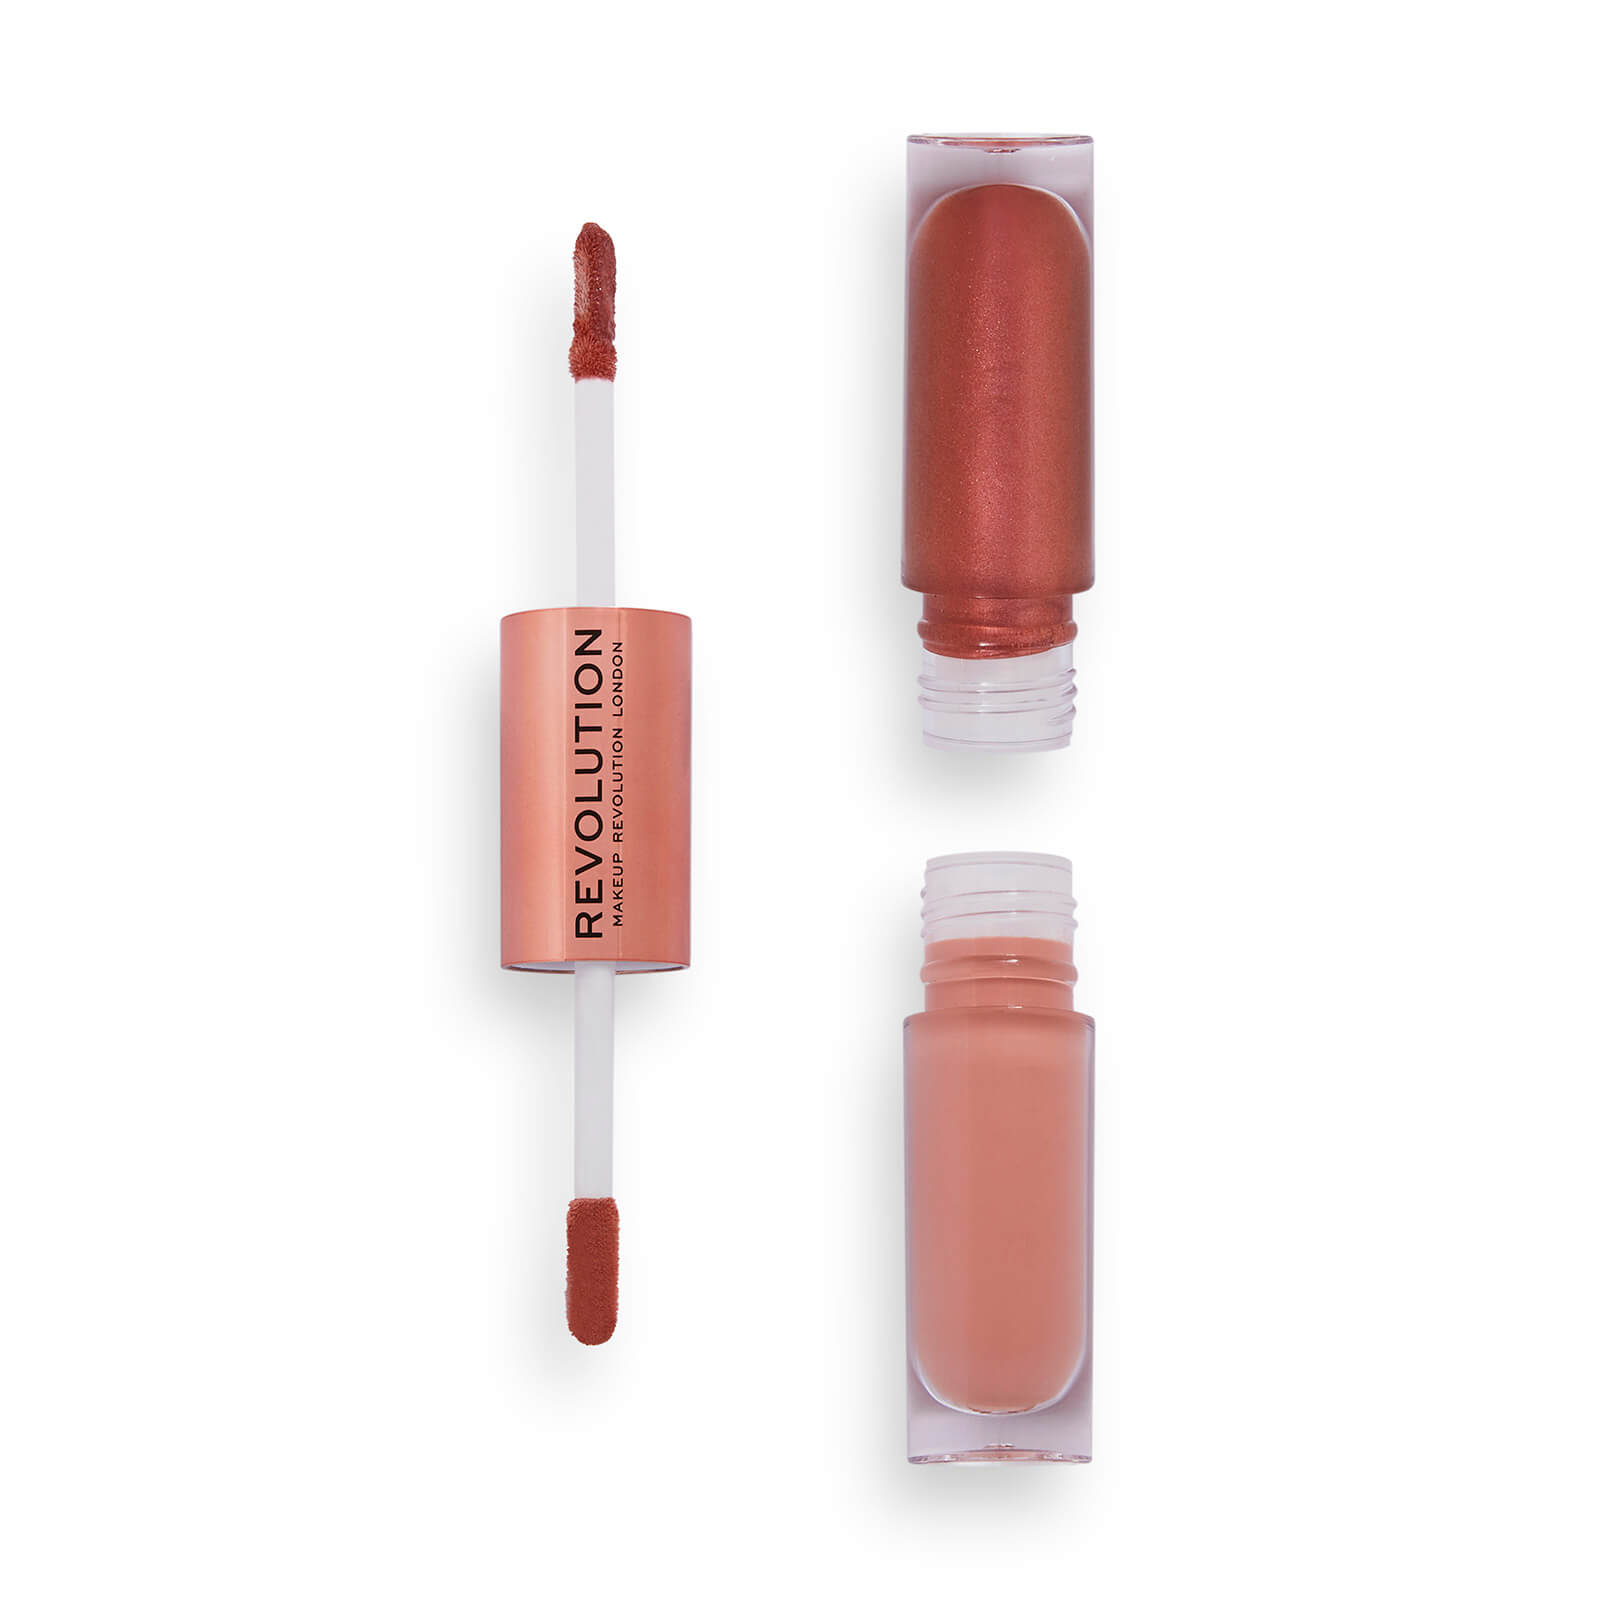 Revolution Double Up Liquid Shadow - Infatuated Rose Gold